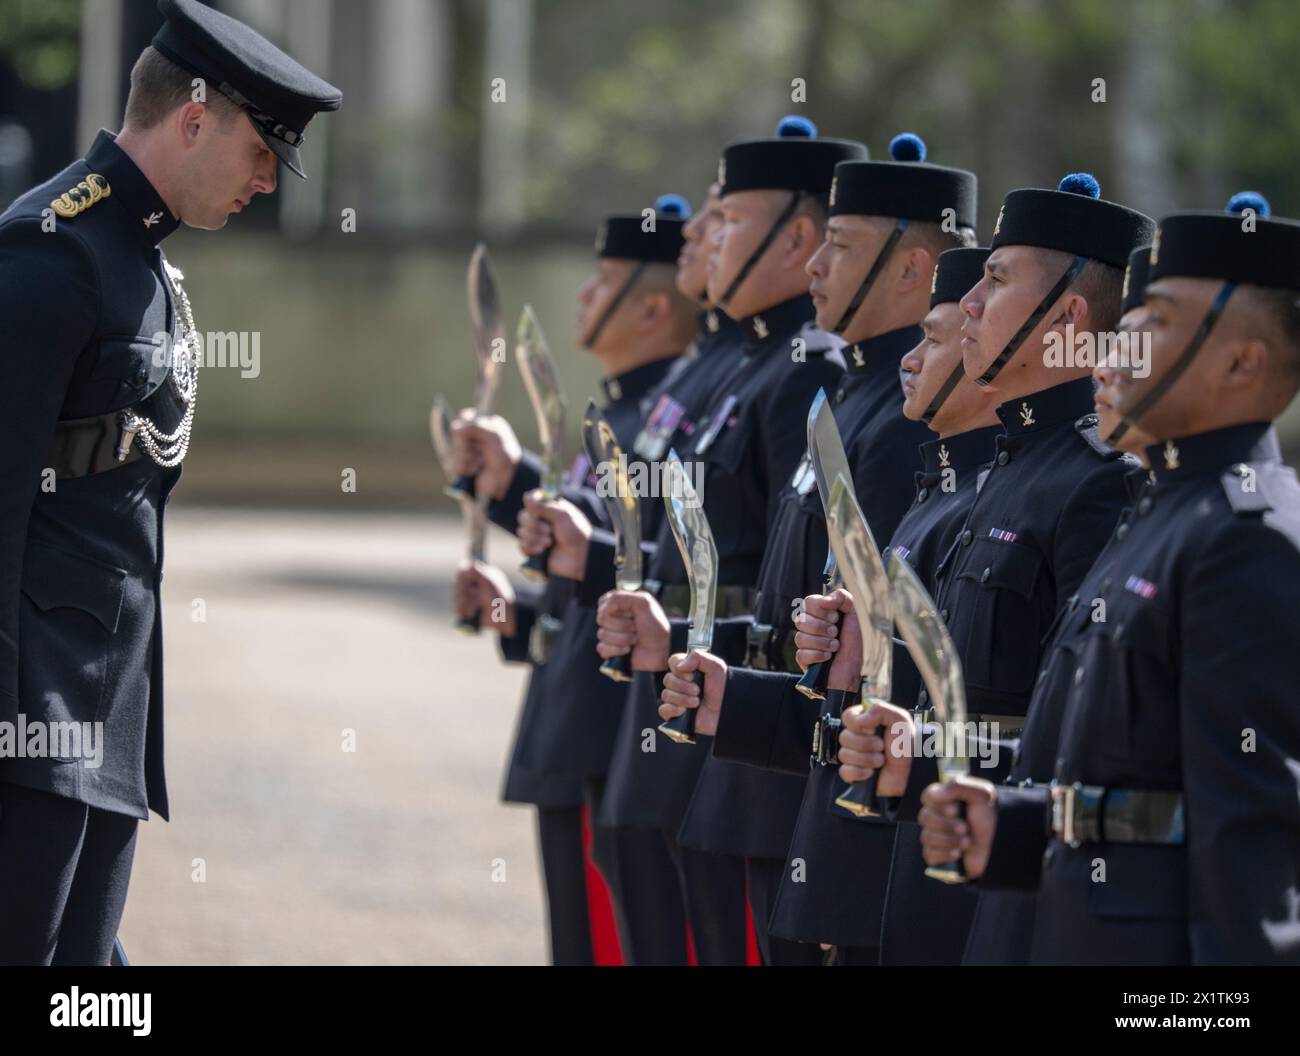 Wellington Barracks, London, UK. 18th Apr, 2024. The Queen's Gurkha Signals receive their Fit For Role Inspection to ensure they are ready to take up Ceremonial Public Duties guarding Buckingham Palace, the Tower of London, St James Palace, and Windsor Castle. Under guidance from the Household Division, they have undergone rigorous inspections and drill practice to raise them to the highest standard. They put everything they have learnt and rehearsed into practice as they face their Fit For Role Inspection on the Wellington Barracks Parade Ground inspected by the Brigade Major, Adjutant London Stock Photo